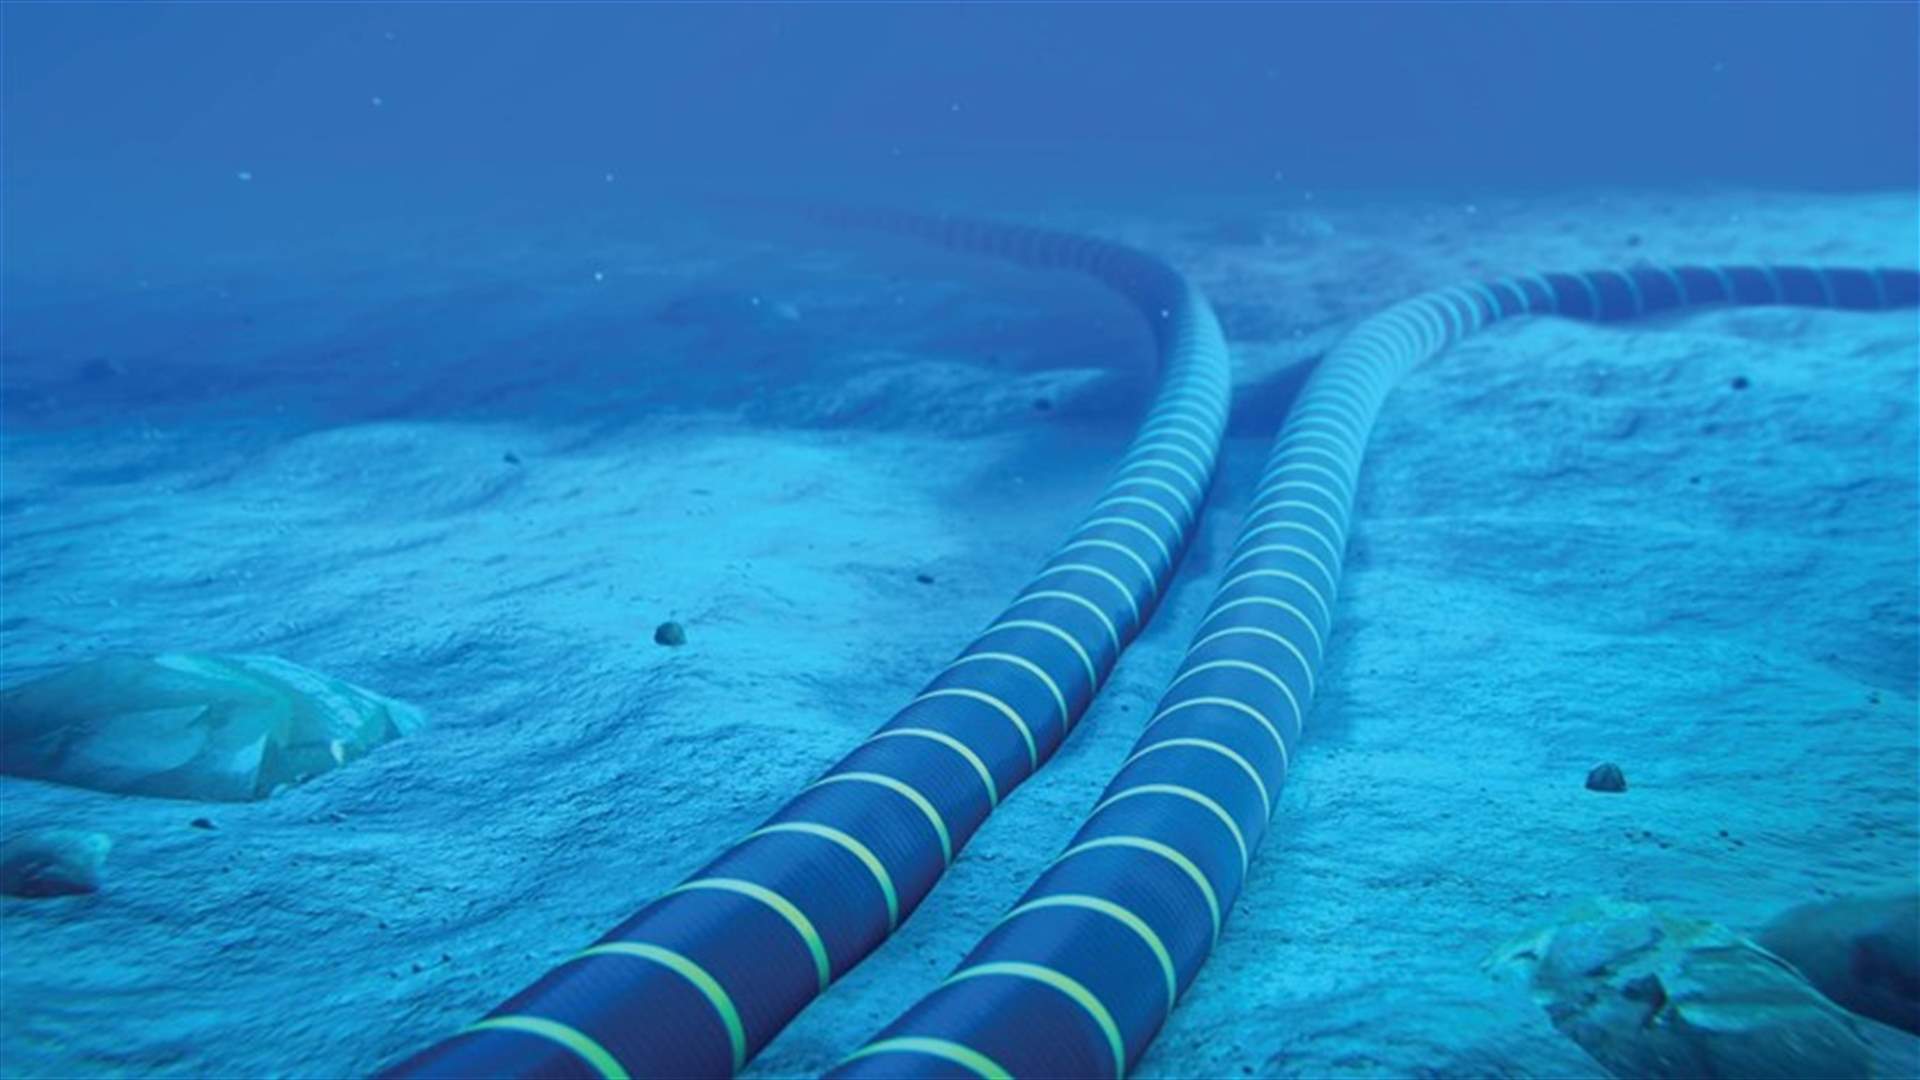 Cyprus to fund new internet submarine cable link to Lebanon